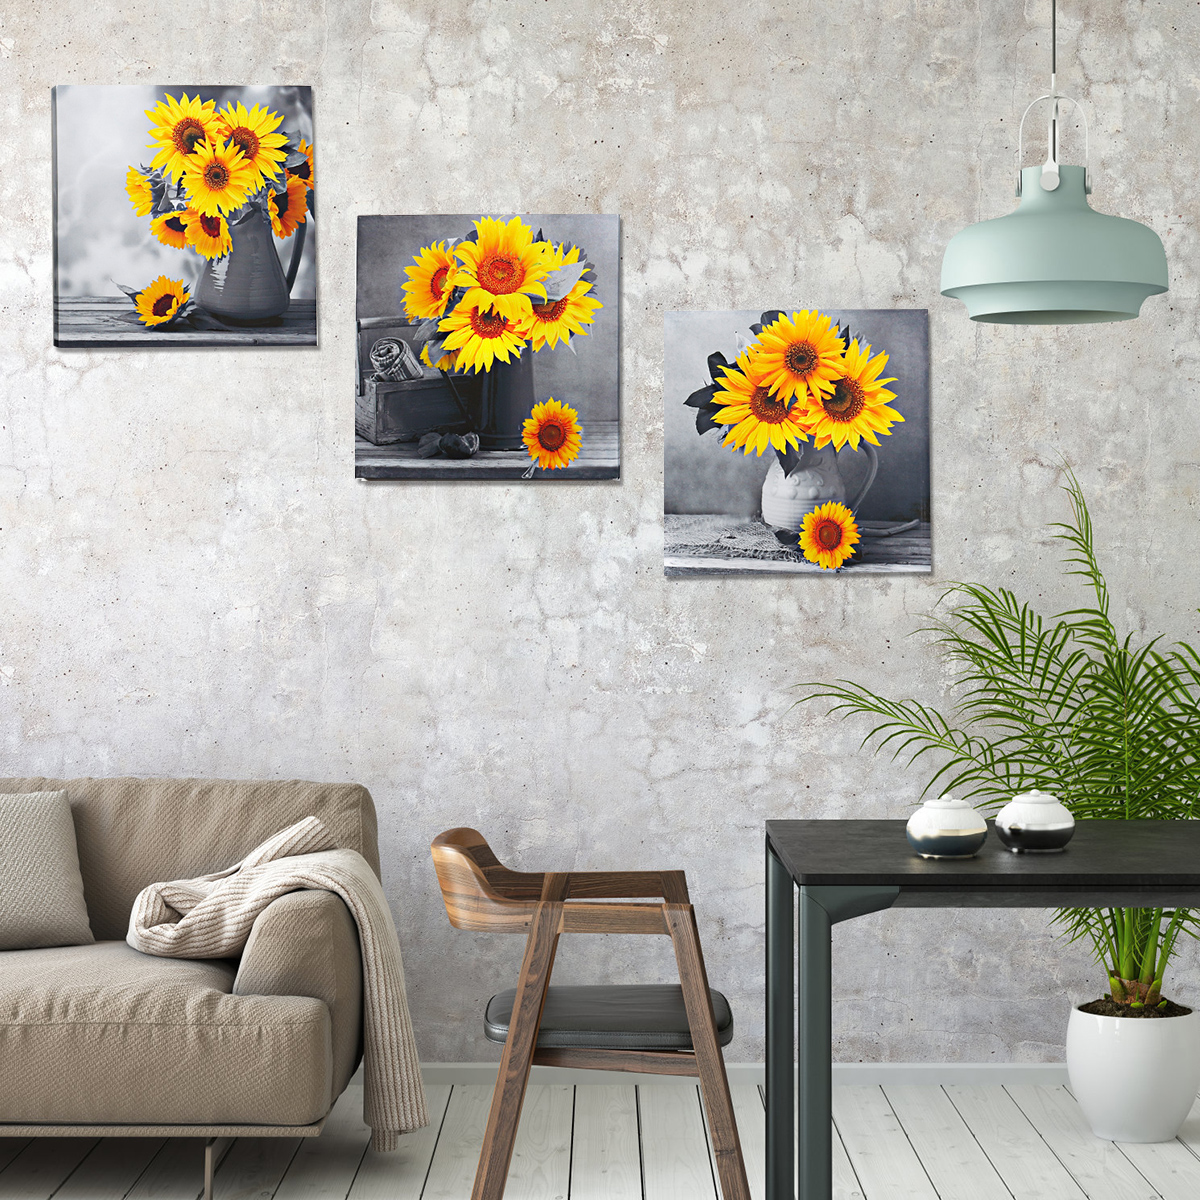 30303-cm-Sunflower-Wall-Art-Painting-Living-Room-Bedroom-Hanging-Canvas-Pictures-Office-Mural-Decora-1791798-7